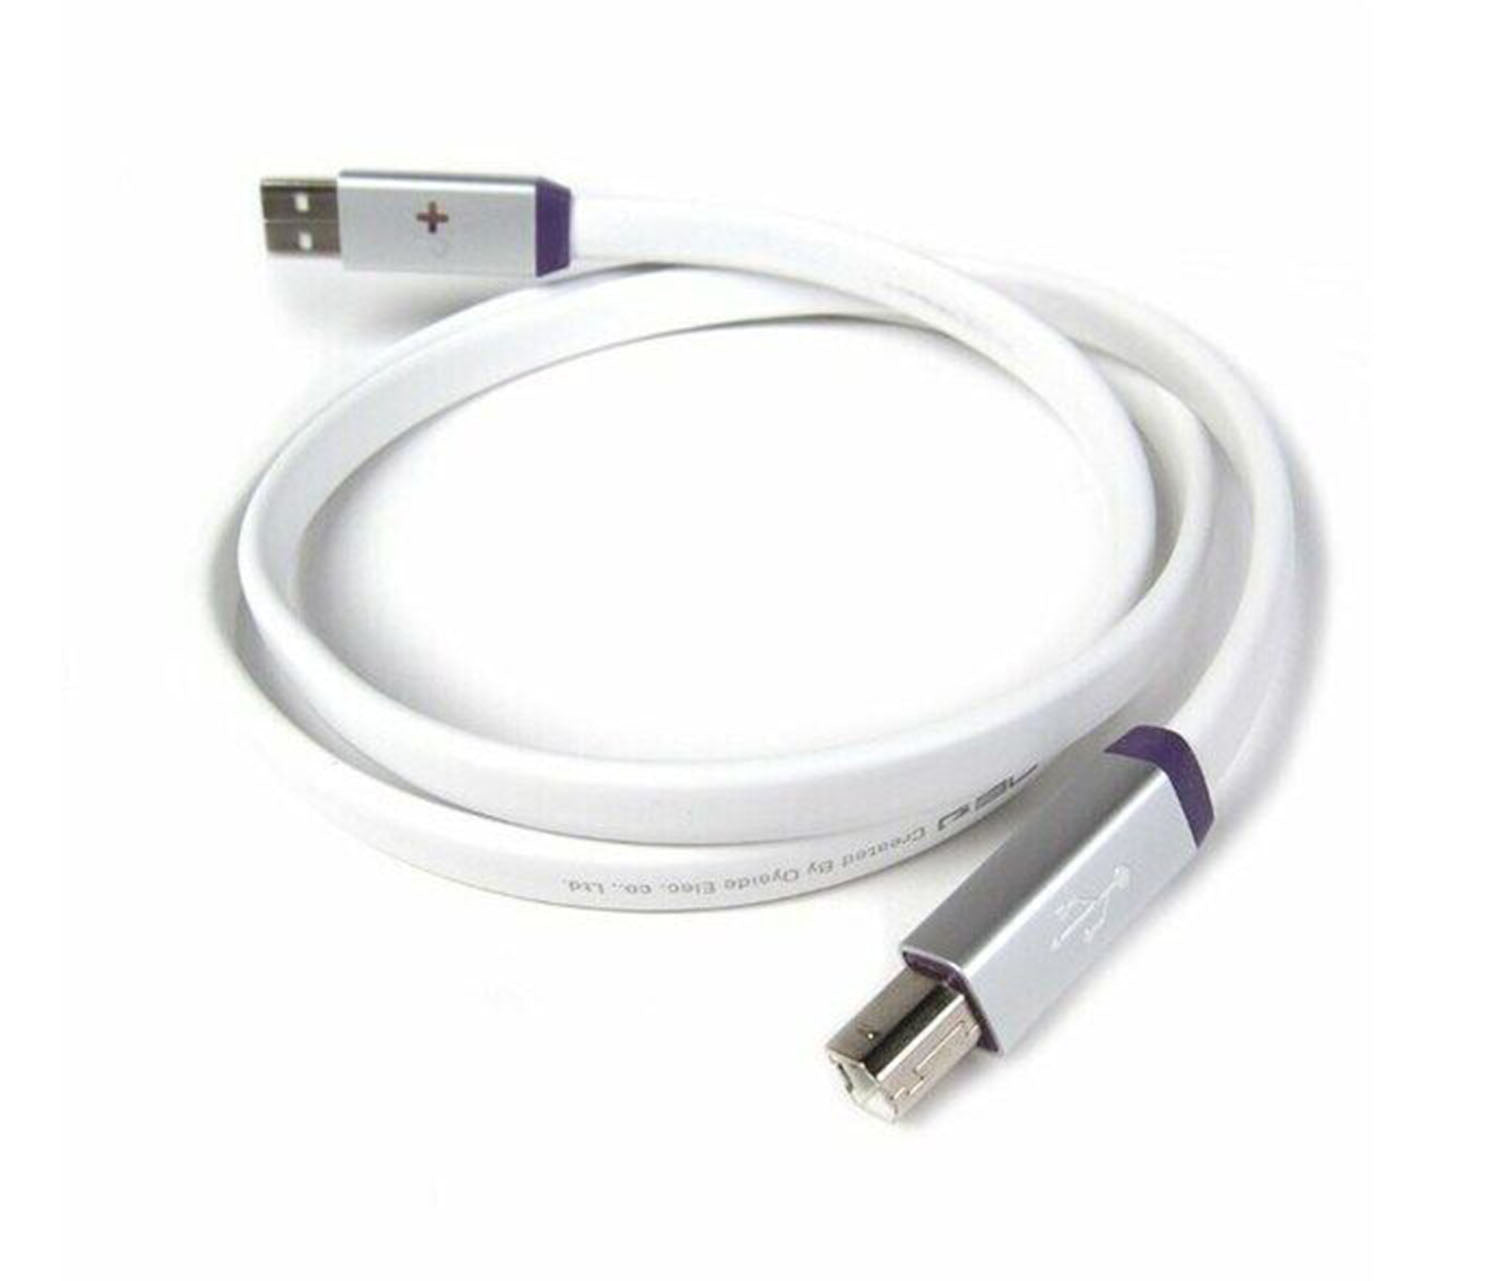 Oyaide Neo d+ USB 2.0 Class S Cable 1M - Hollywood DJ